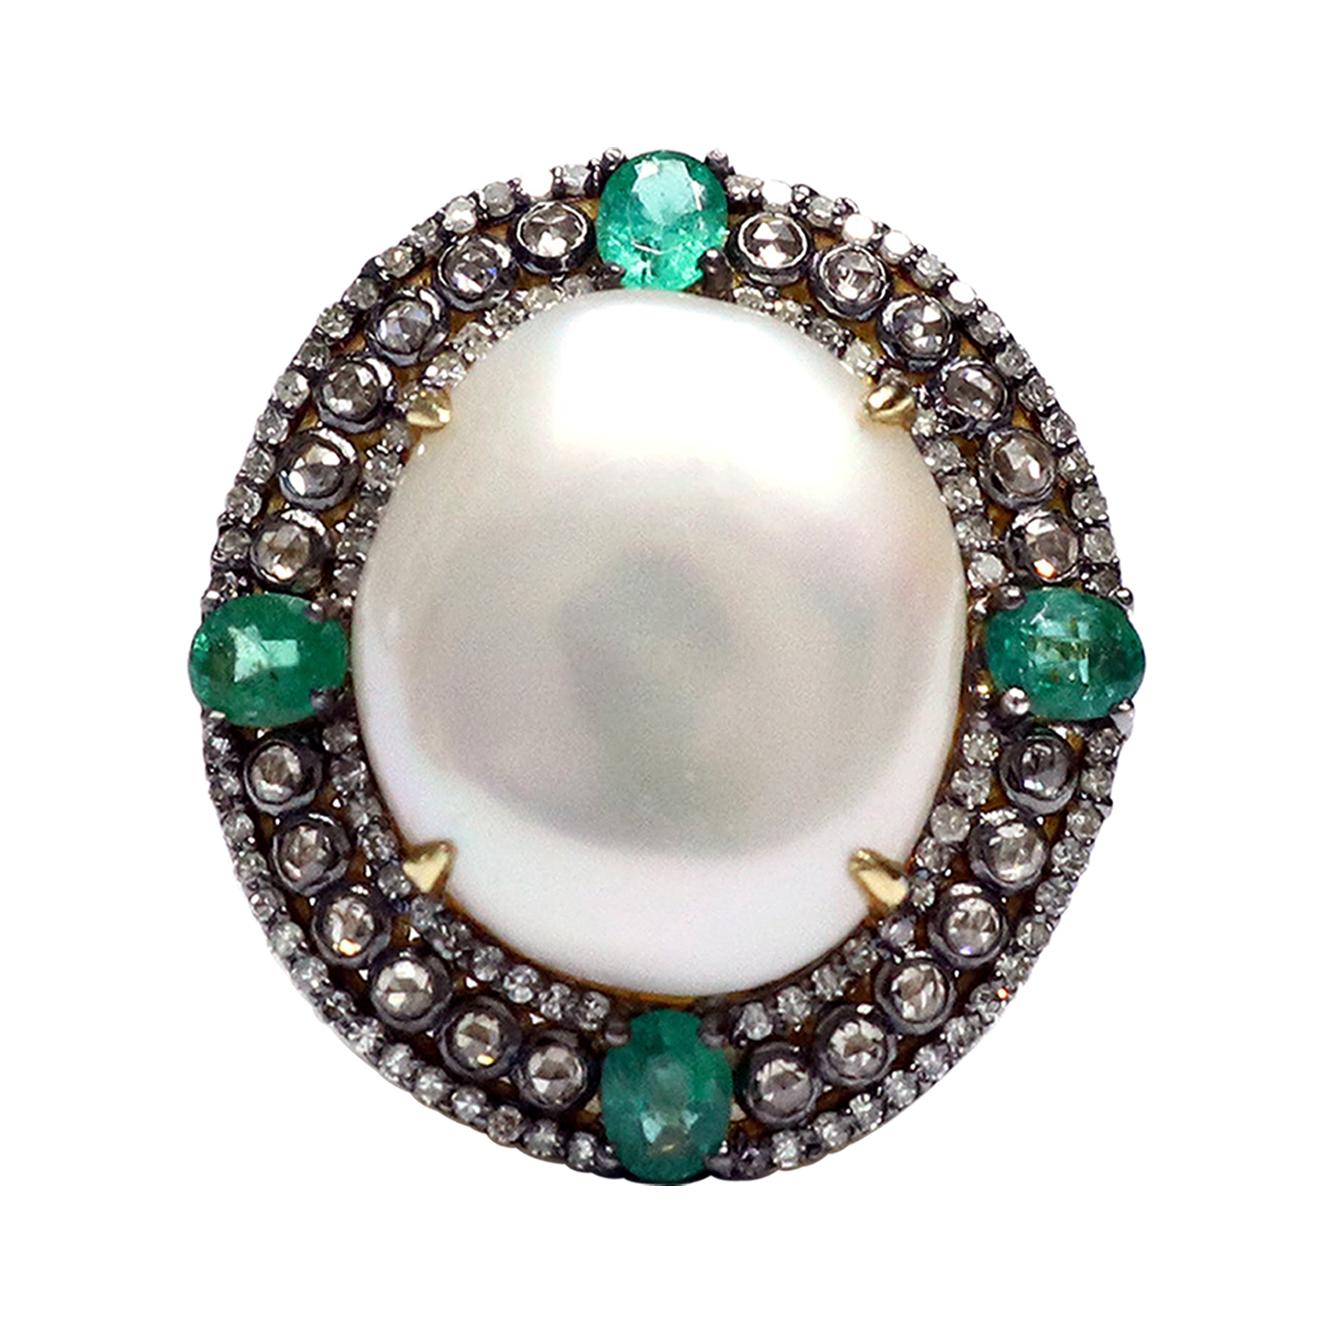 Victorian Style Emerald, Diamond, and Pearl Statement Ring